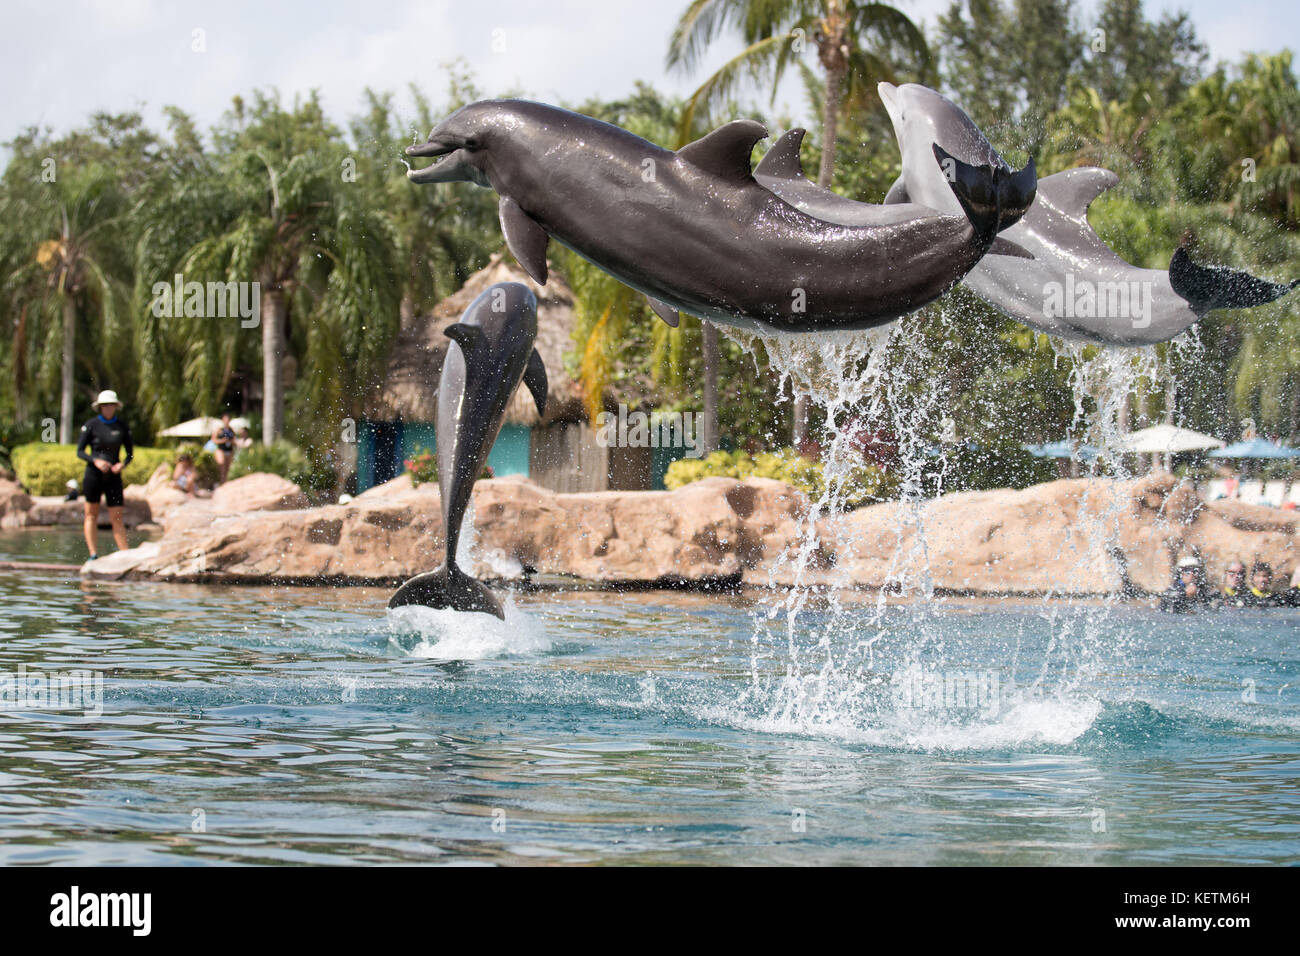 Dolphins during the Dreamflight visit to Discovery Cove in Orlando, Florida. Stock Photo